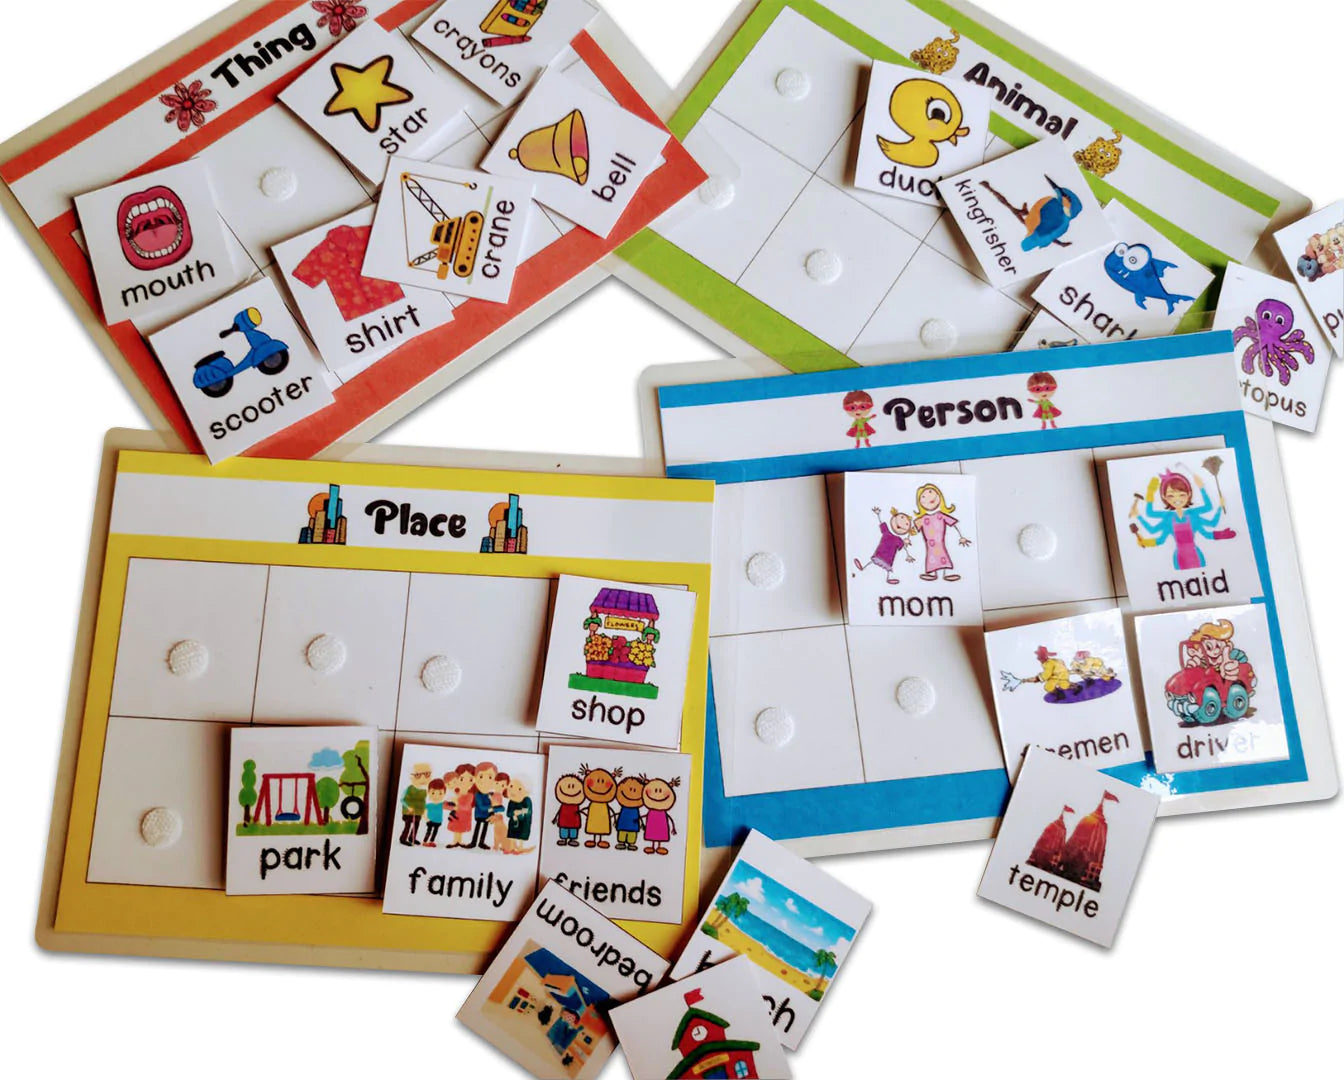 Buy Noun - Person, Place, Animal and Things Sorting Learning Activity - SkilloToys.com